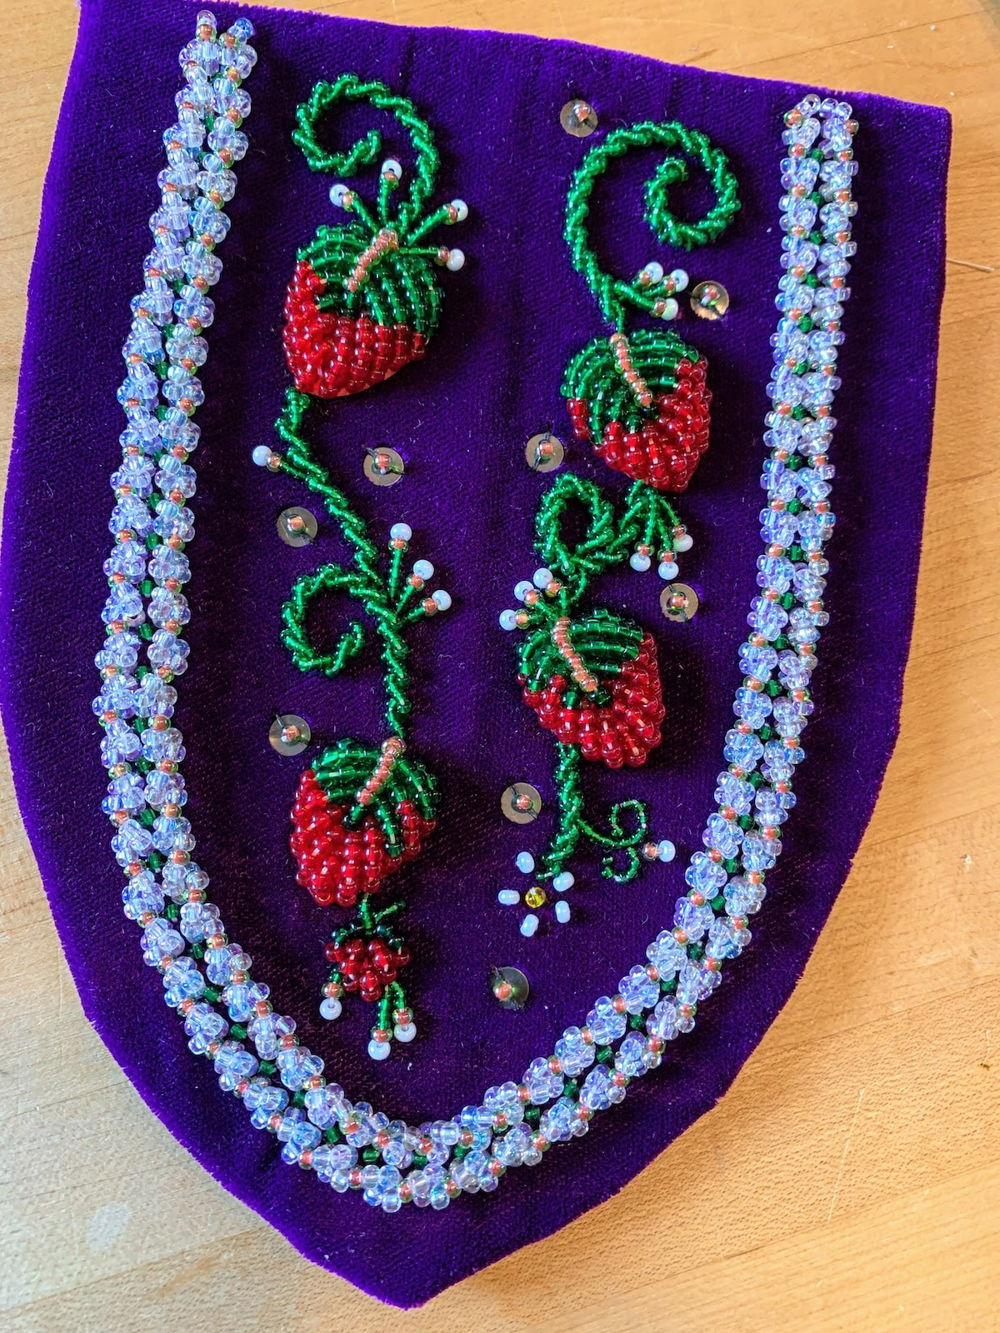 [ID: A semicircle piece of purple fabric embroidered with intricate beadwork of red strawberries, white flowers, and green leaves.]